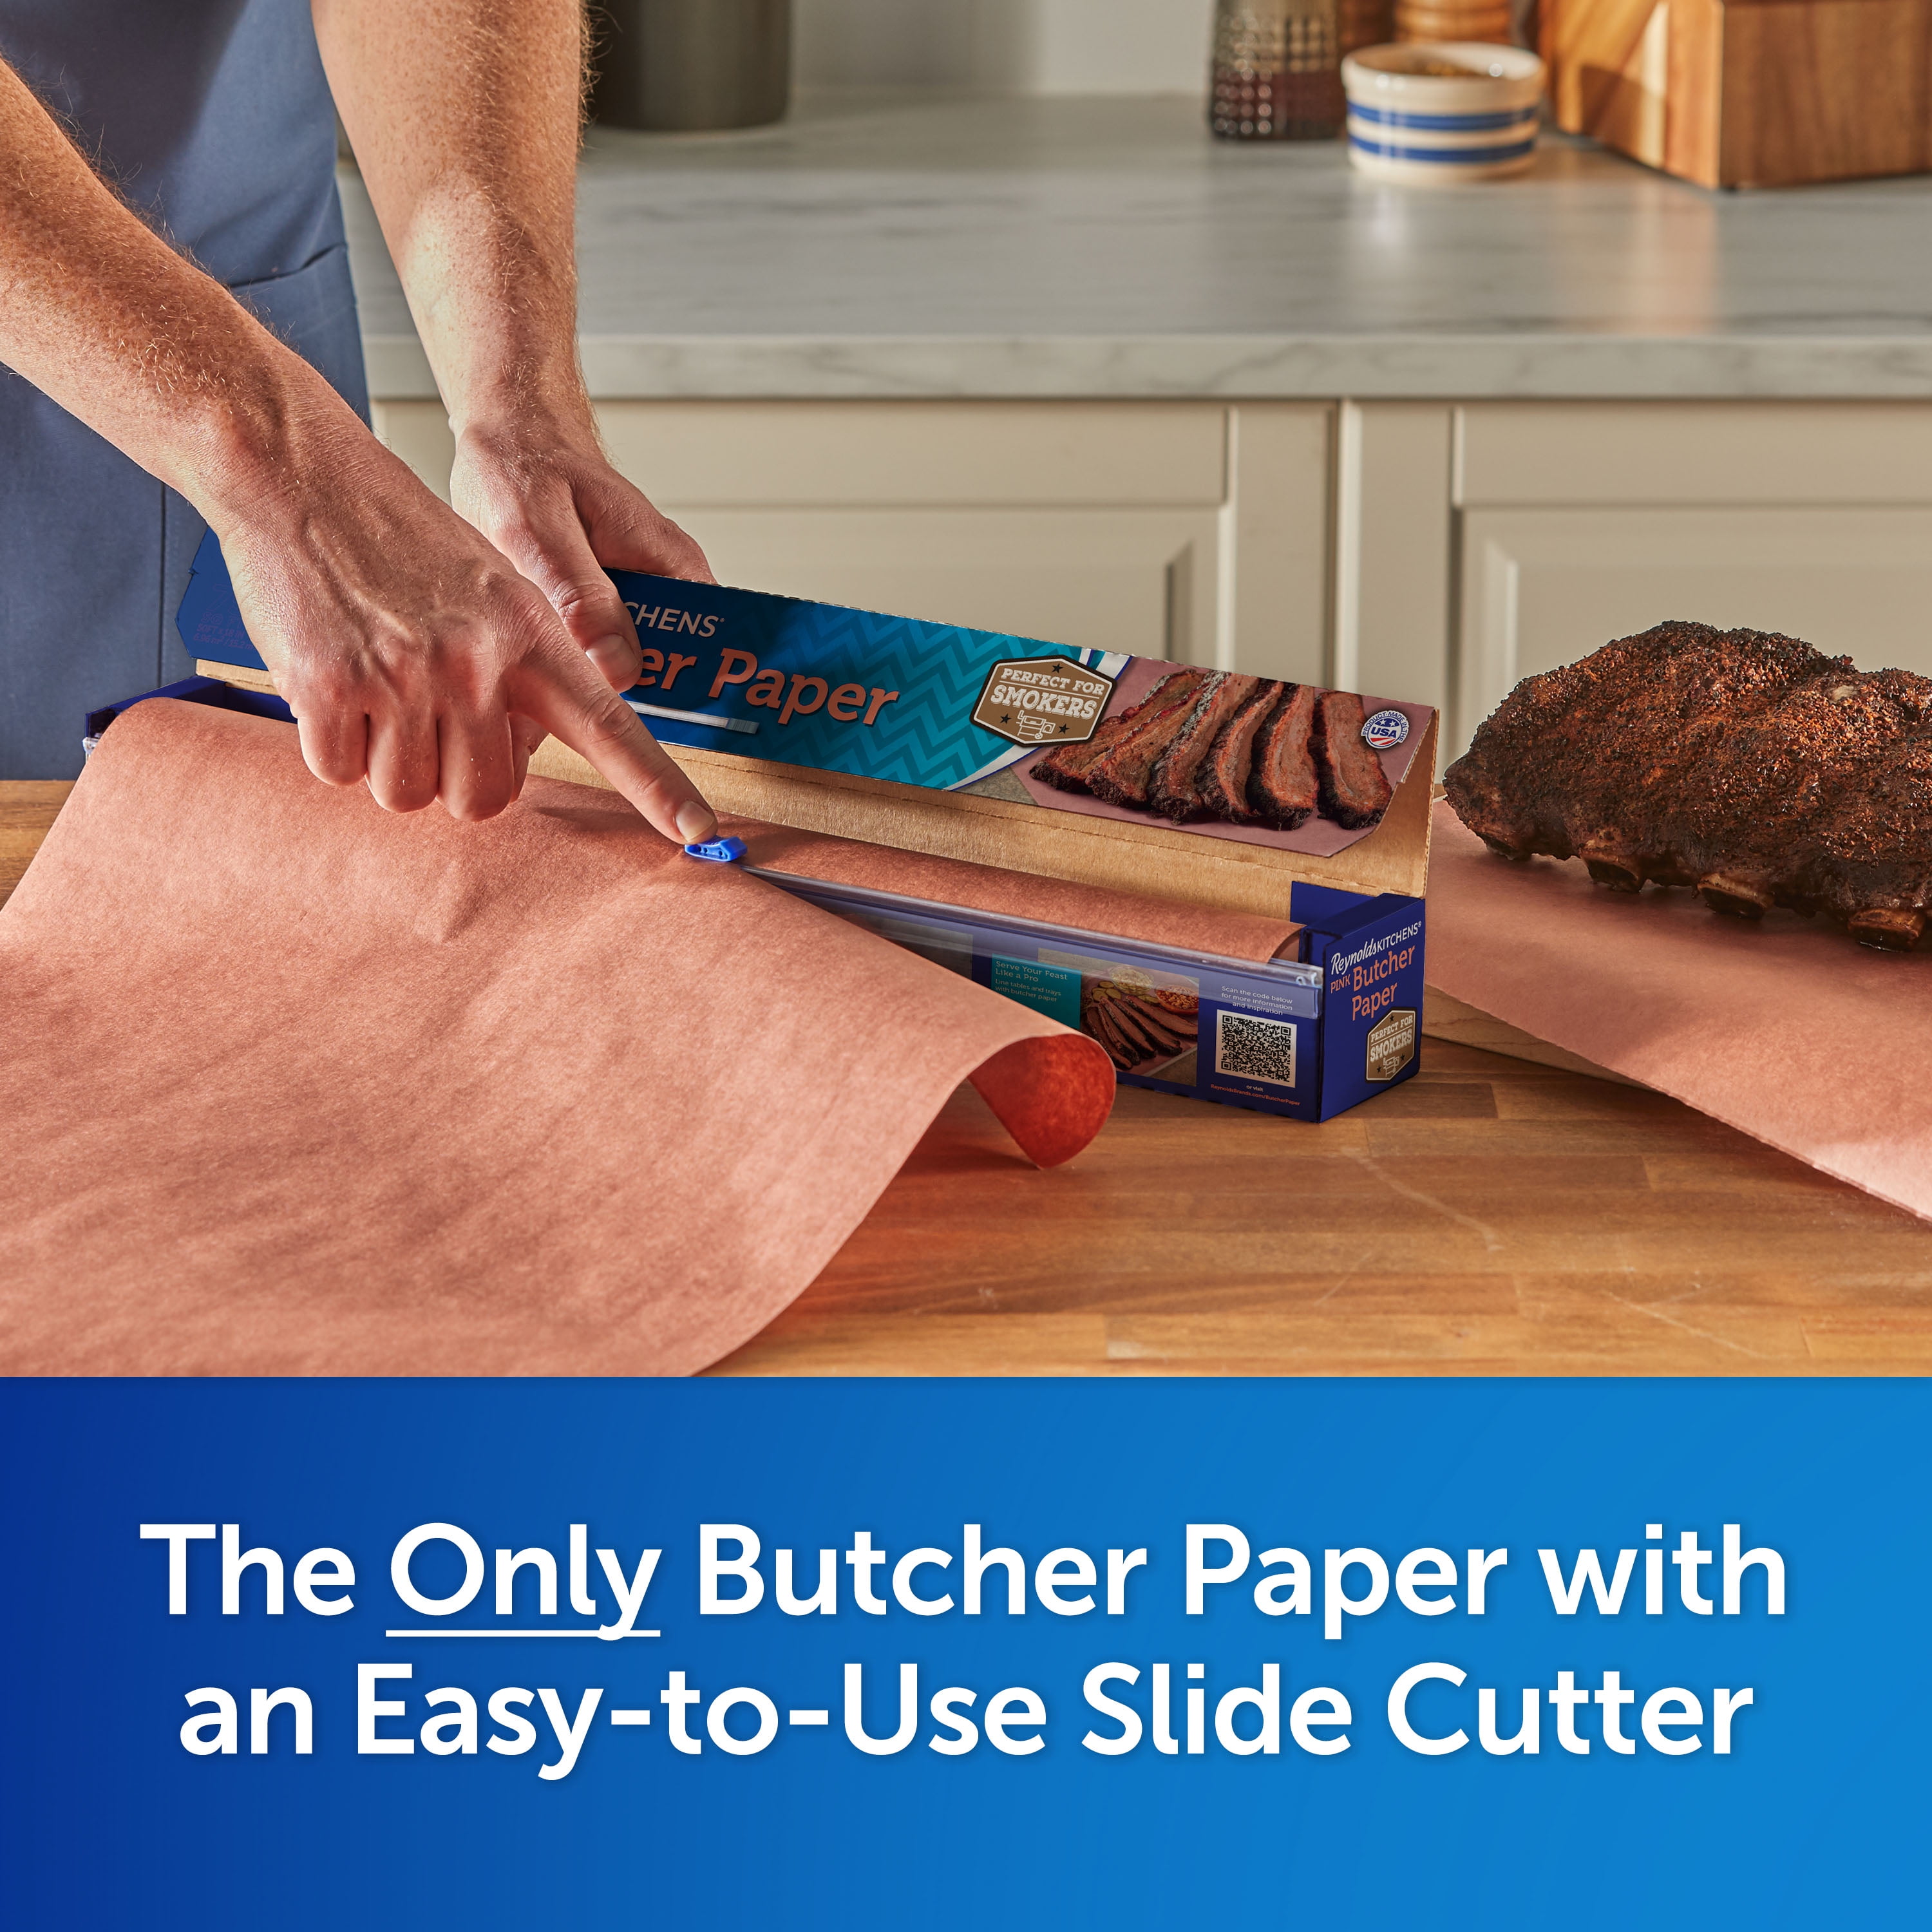 Reynolds Kitchens® Pink Butcher Paper, 225 sq ft - Dillons Food Stores